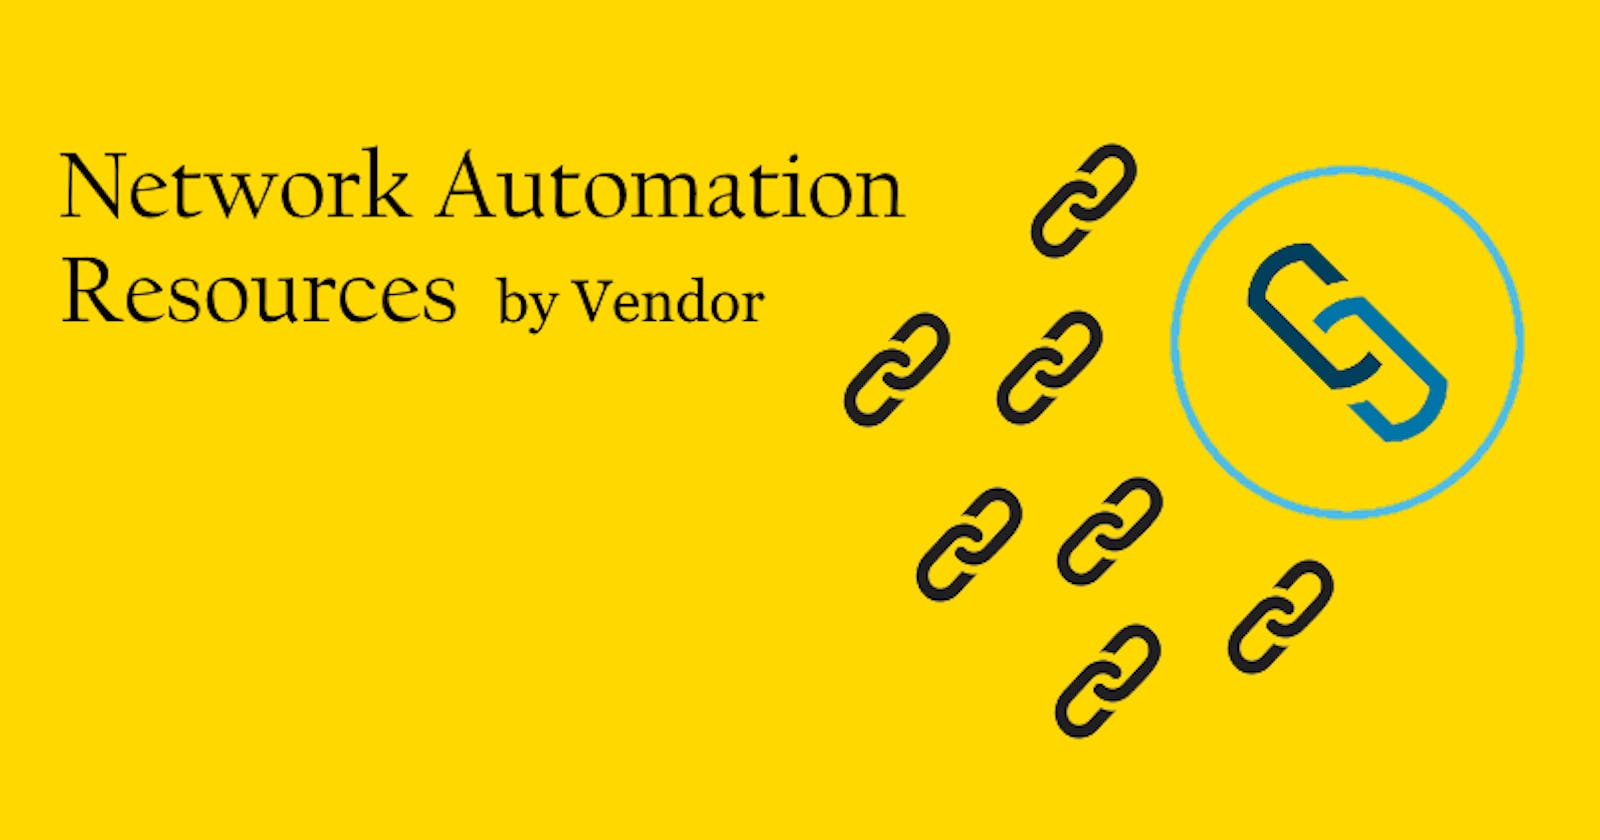 Network Automation Resources